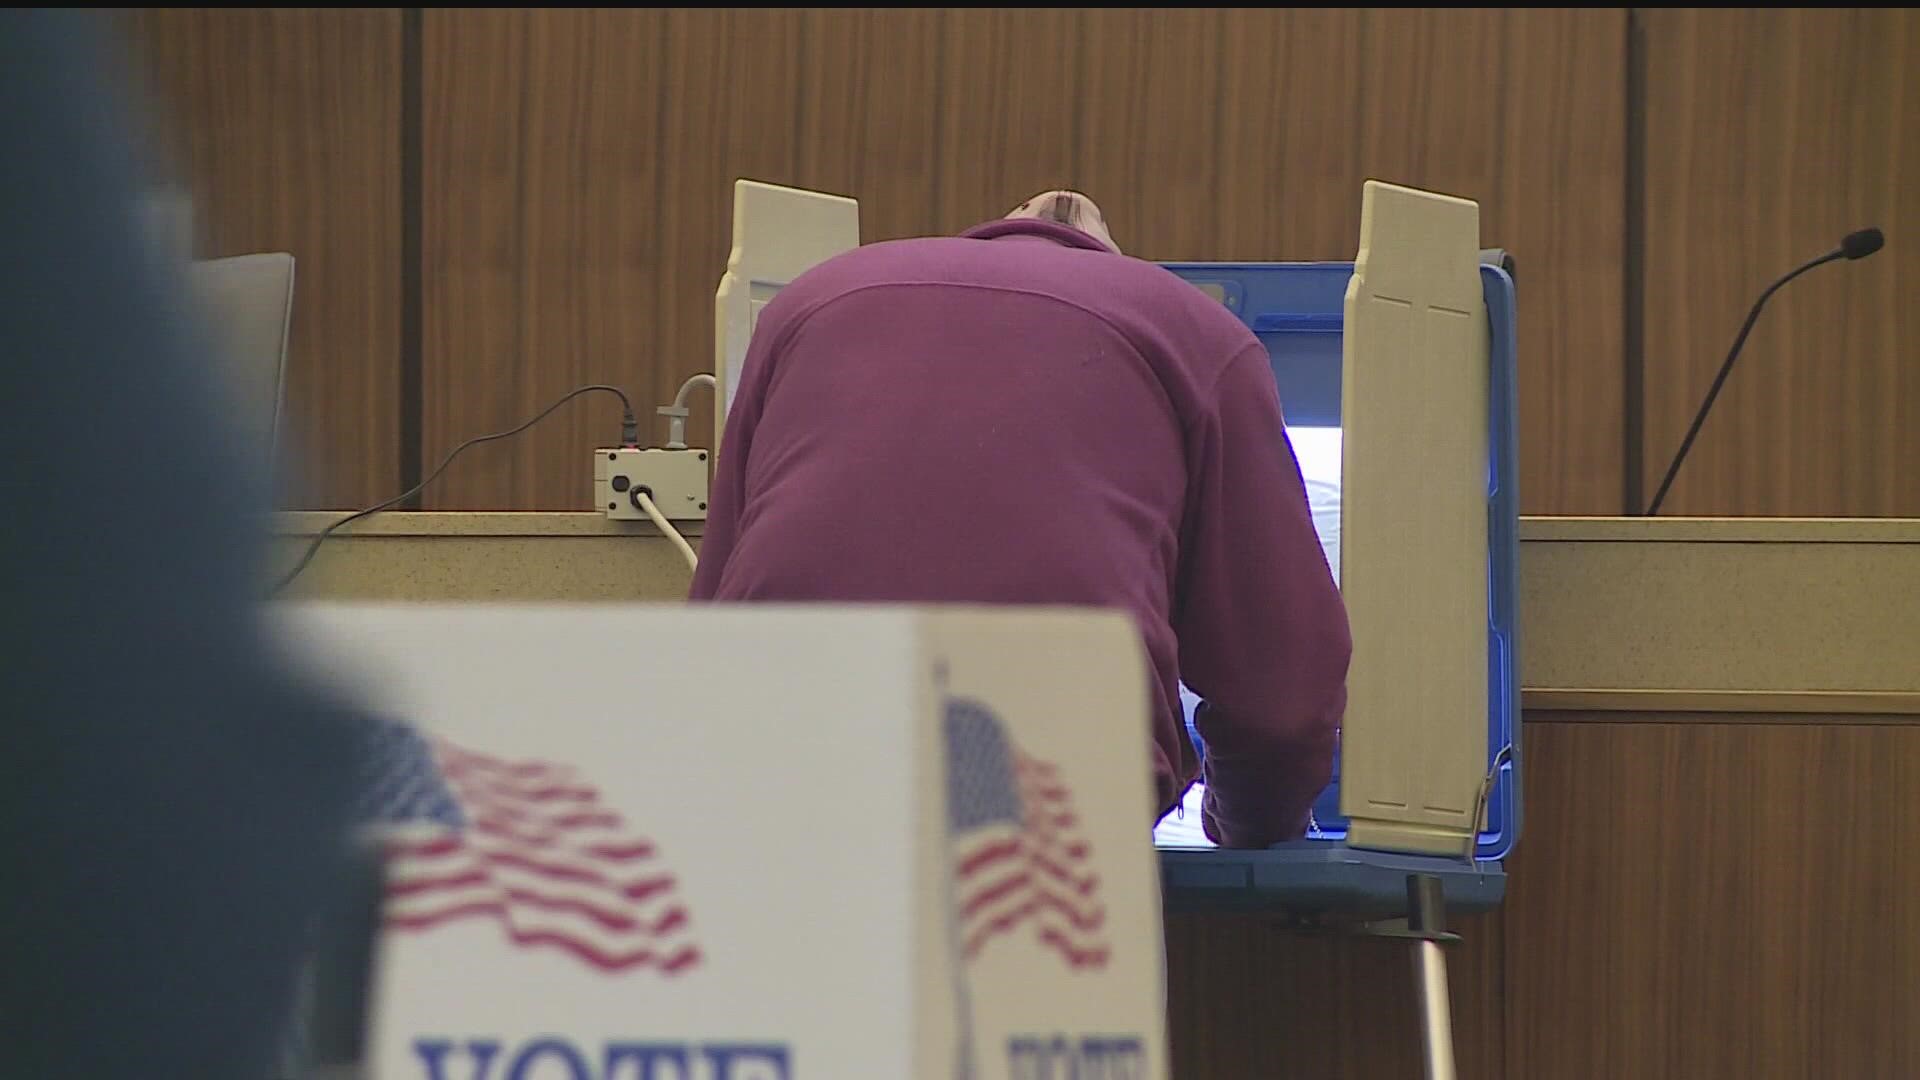 On Friday morning officials will give a live demonstration of a voting machine.